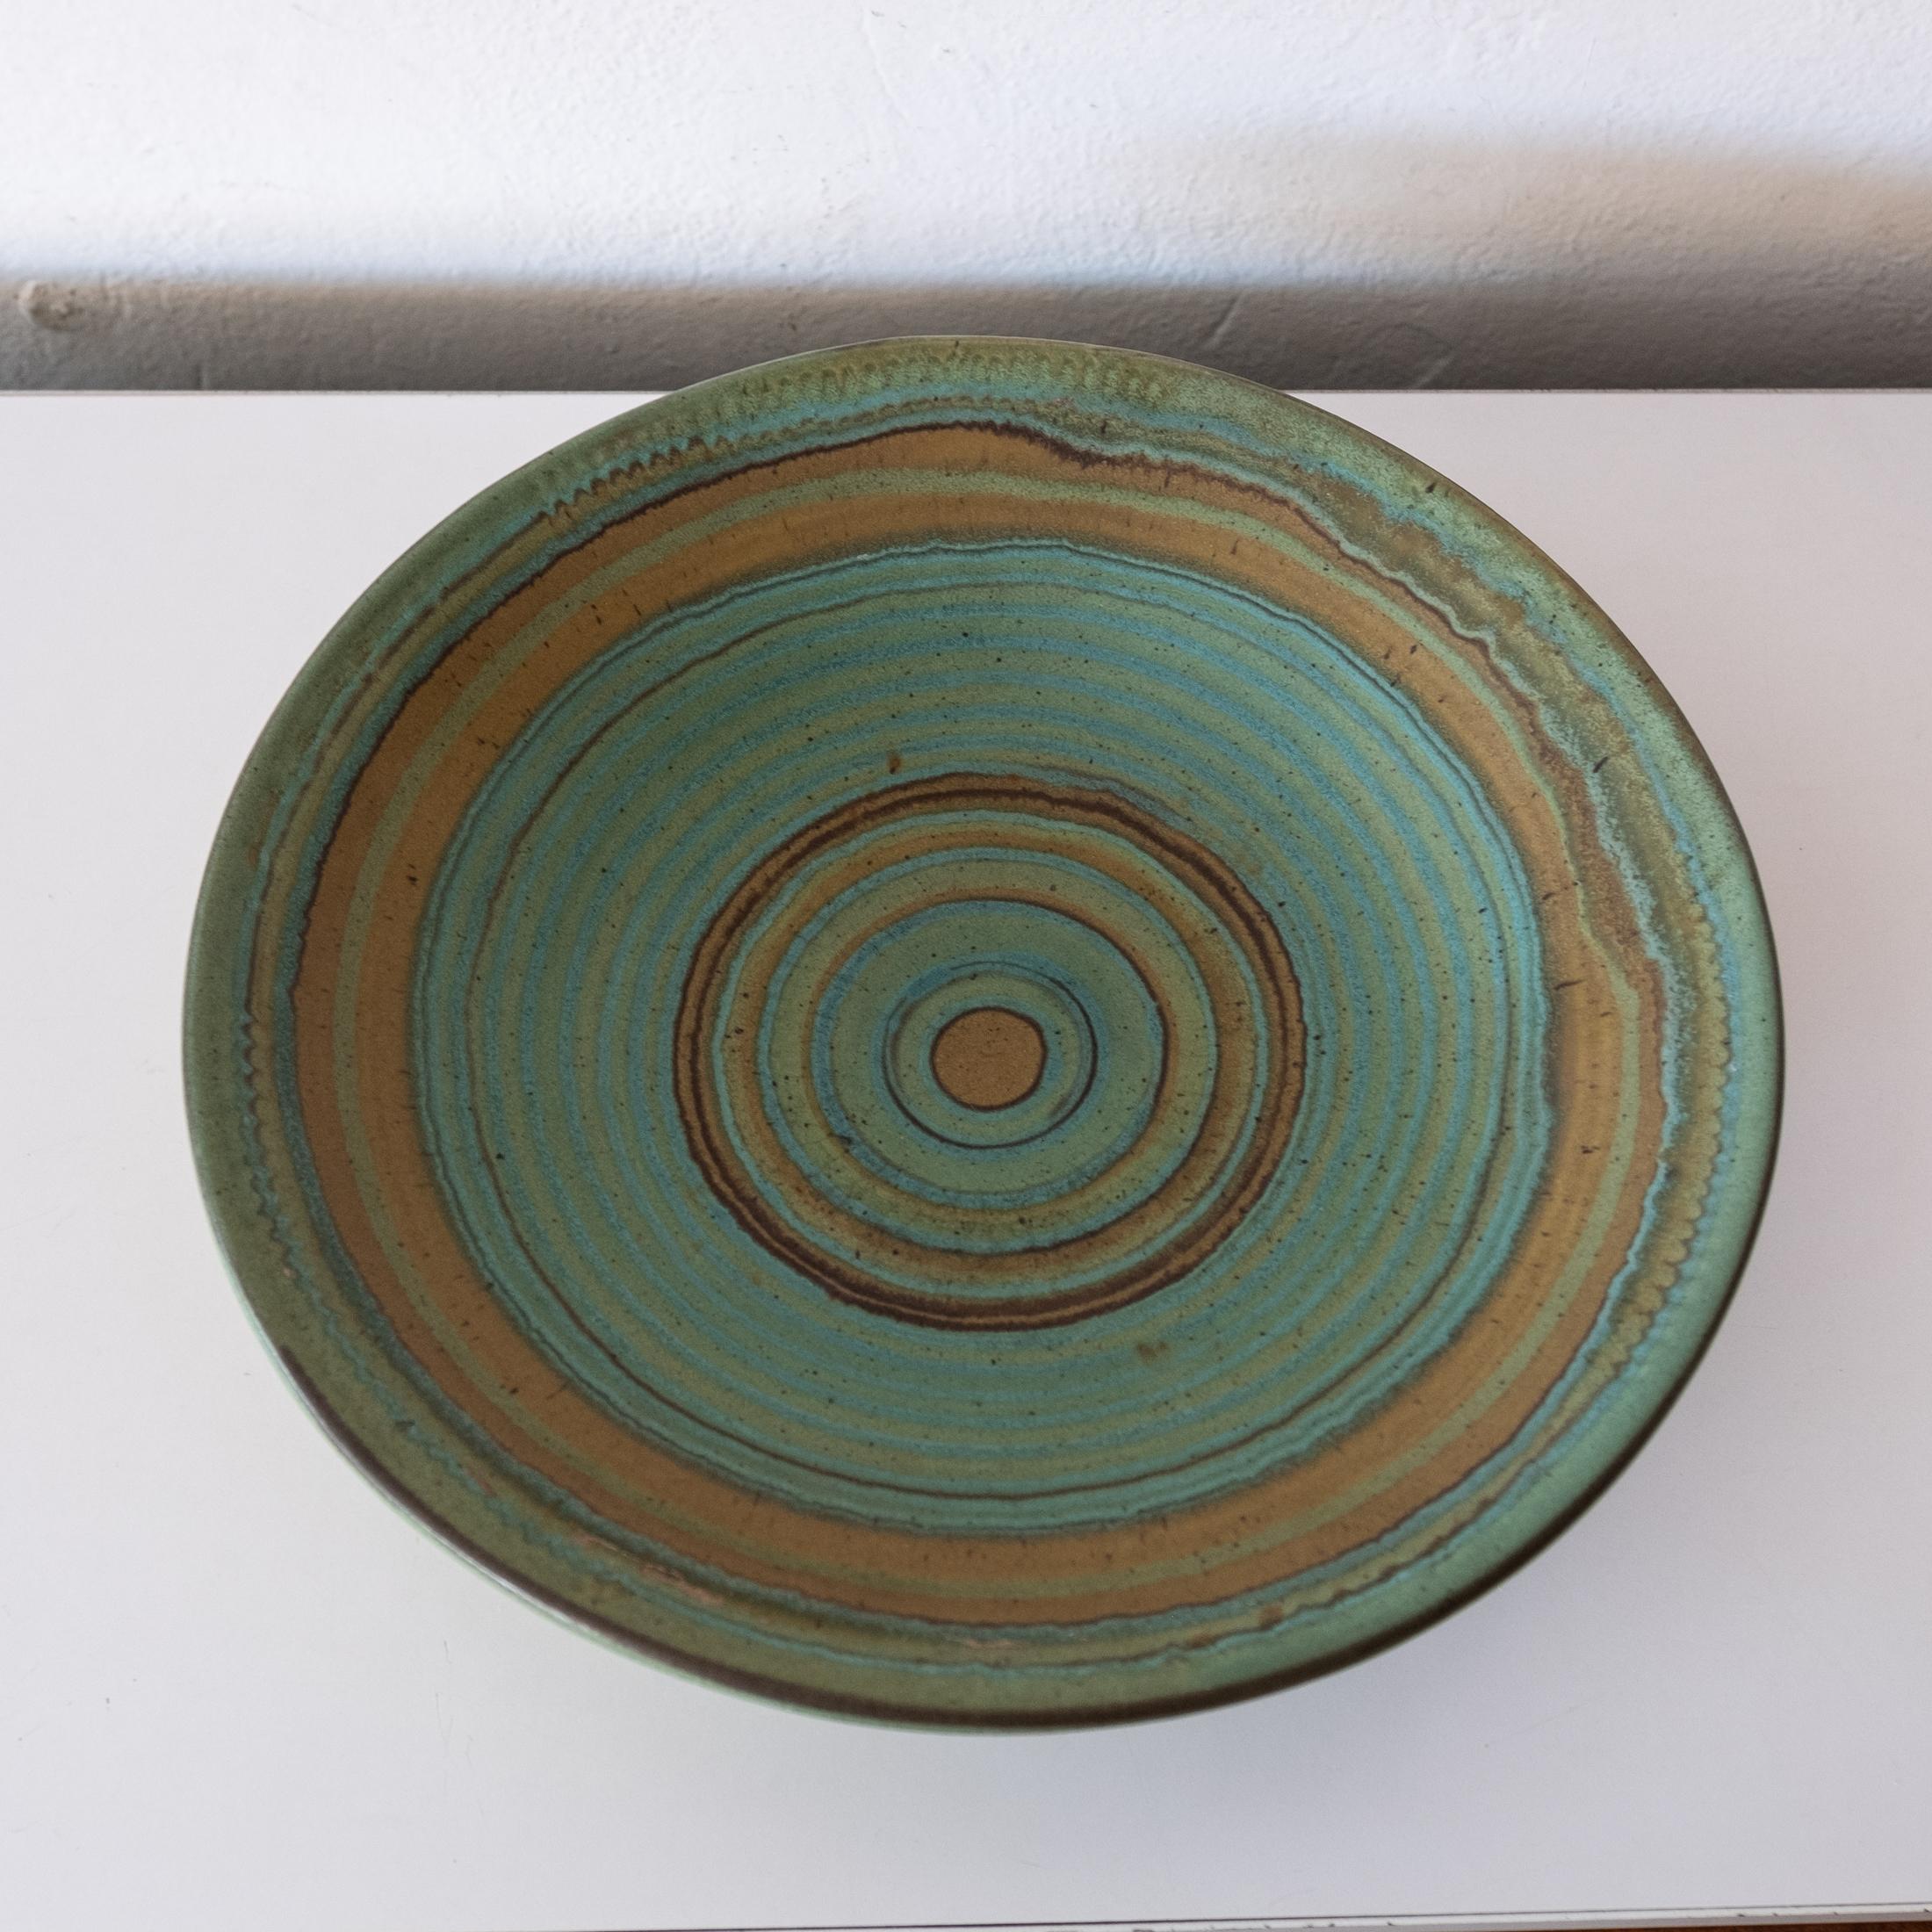 Fong Chow for Glidden Green Mesa large ceramic bowl. Alfred, NY 1950s

Fong Chow (1923-2012 ) was a Chinese American ceramicist, curator, and photographer from New York, N.Y.

In 1951 Fong Chow completed a program at the Boston Museum School,